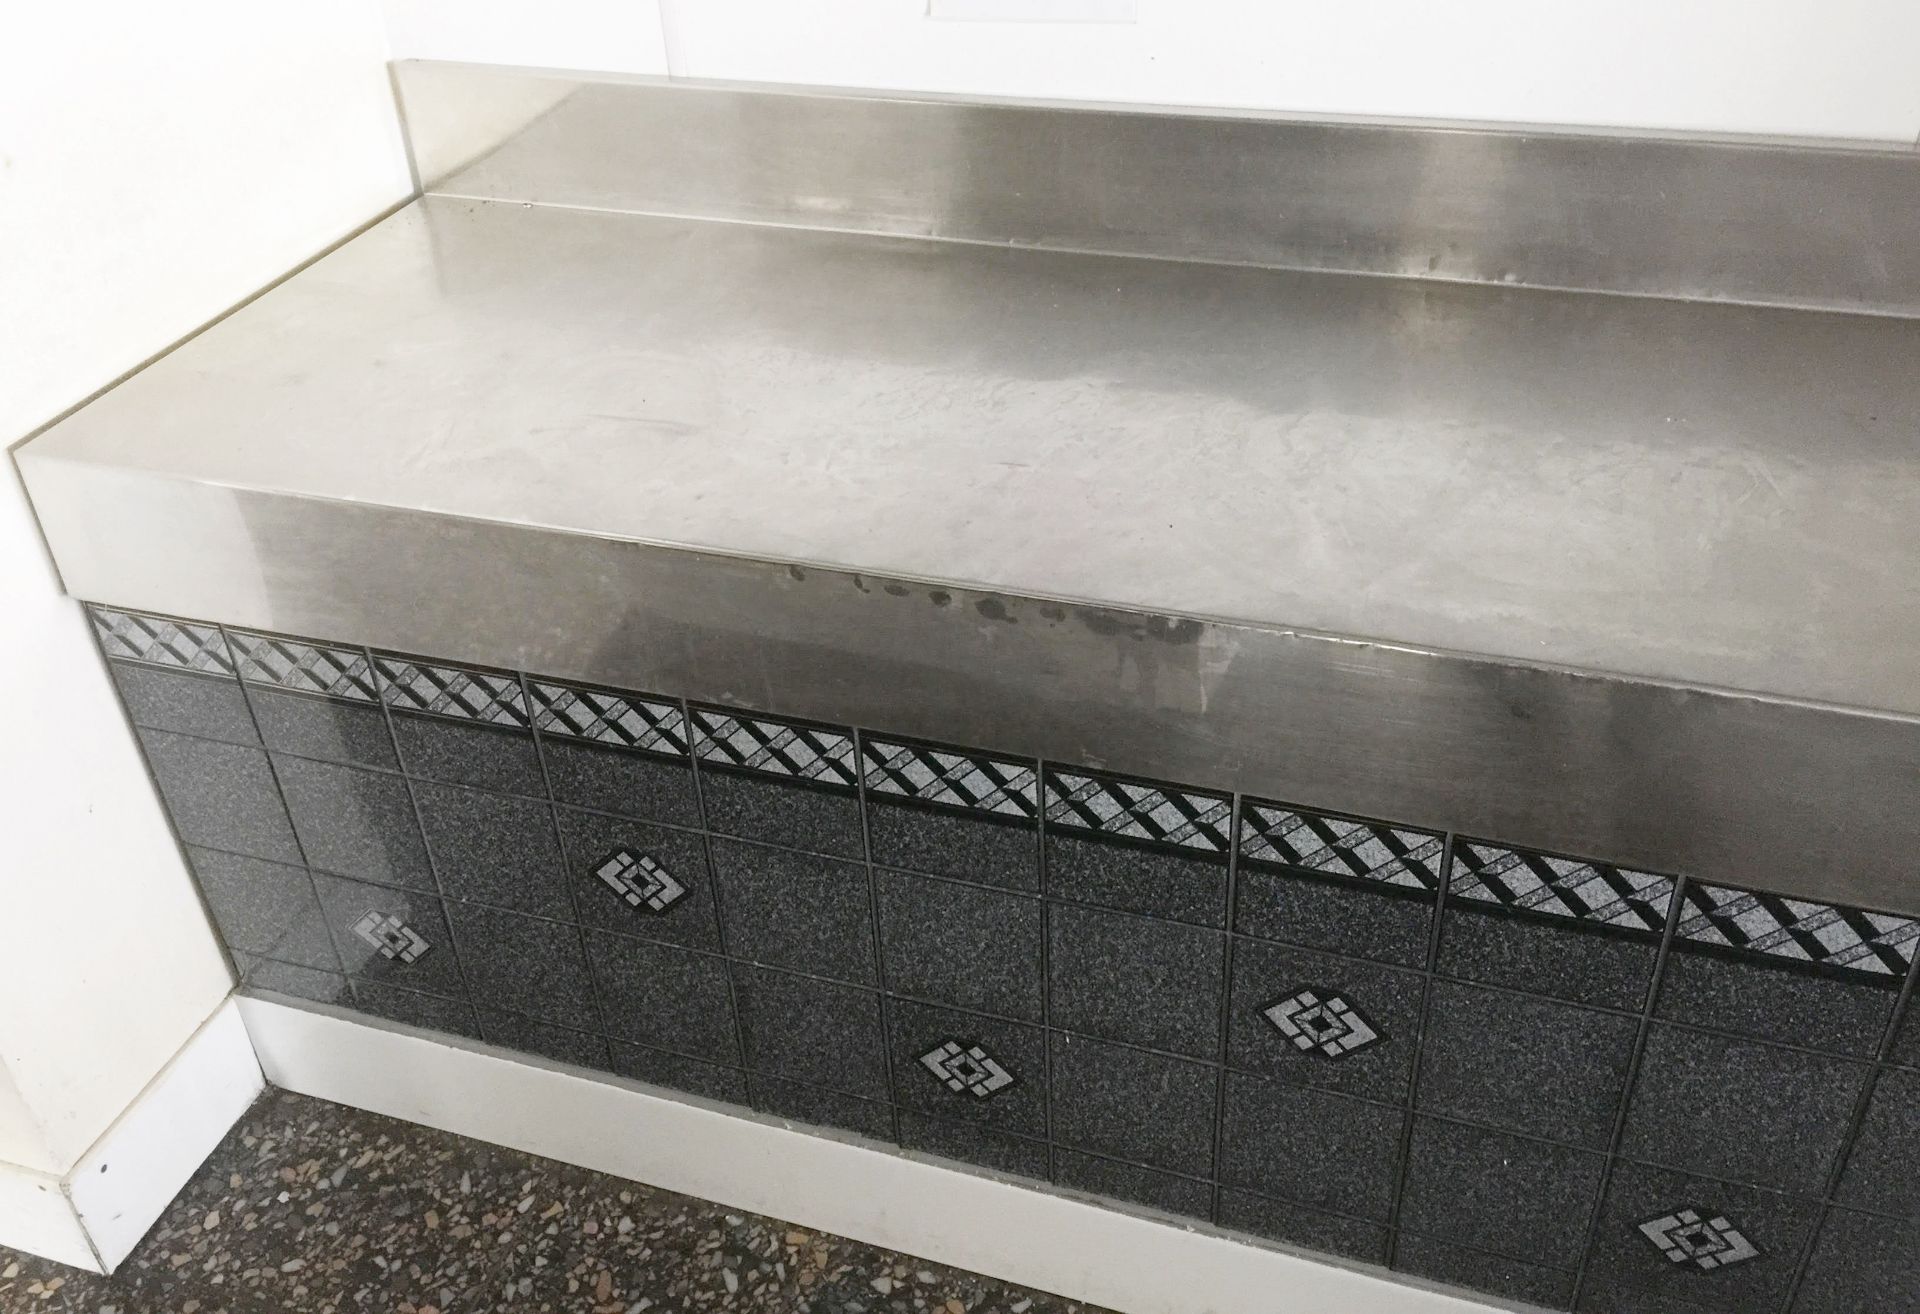 1 x Stainless Steel Counter - Approx 9FT In Length, 64cm Deep - Location: Garstang, Preston PR3